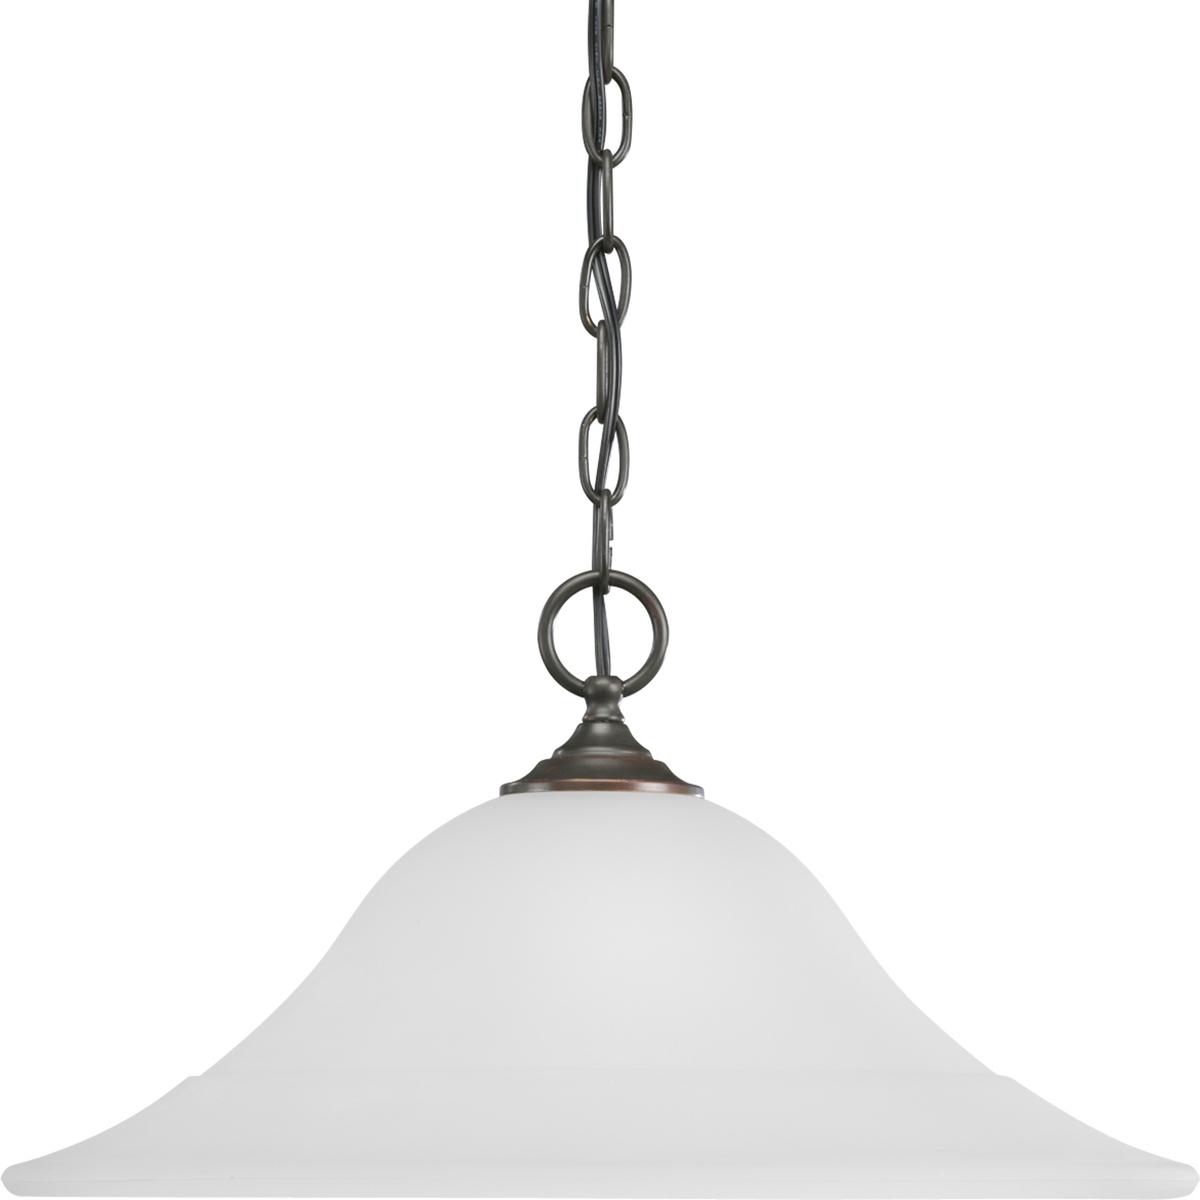 Hubbell P5095-20 One-light pendant featuring soft angles, curving lines and etched glass shades. Gracefully exotic, the Trinity Collection offers classic sophistication for transitional interiors. Sculptural forms of metal and glass are enhanced by a classic finish. This 